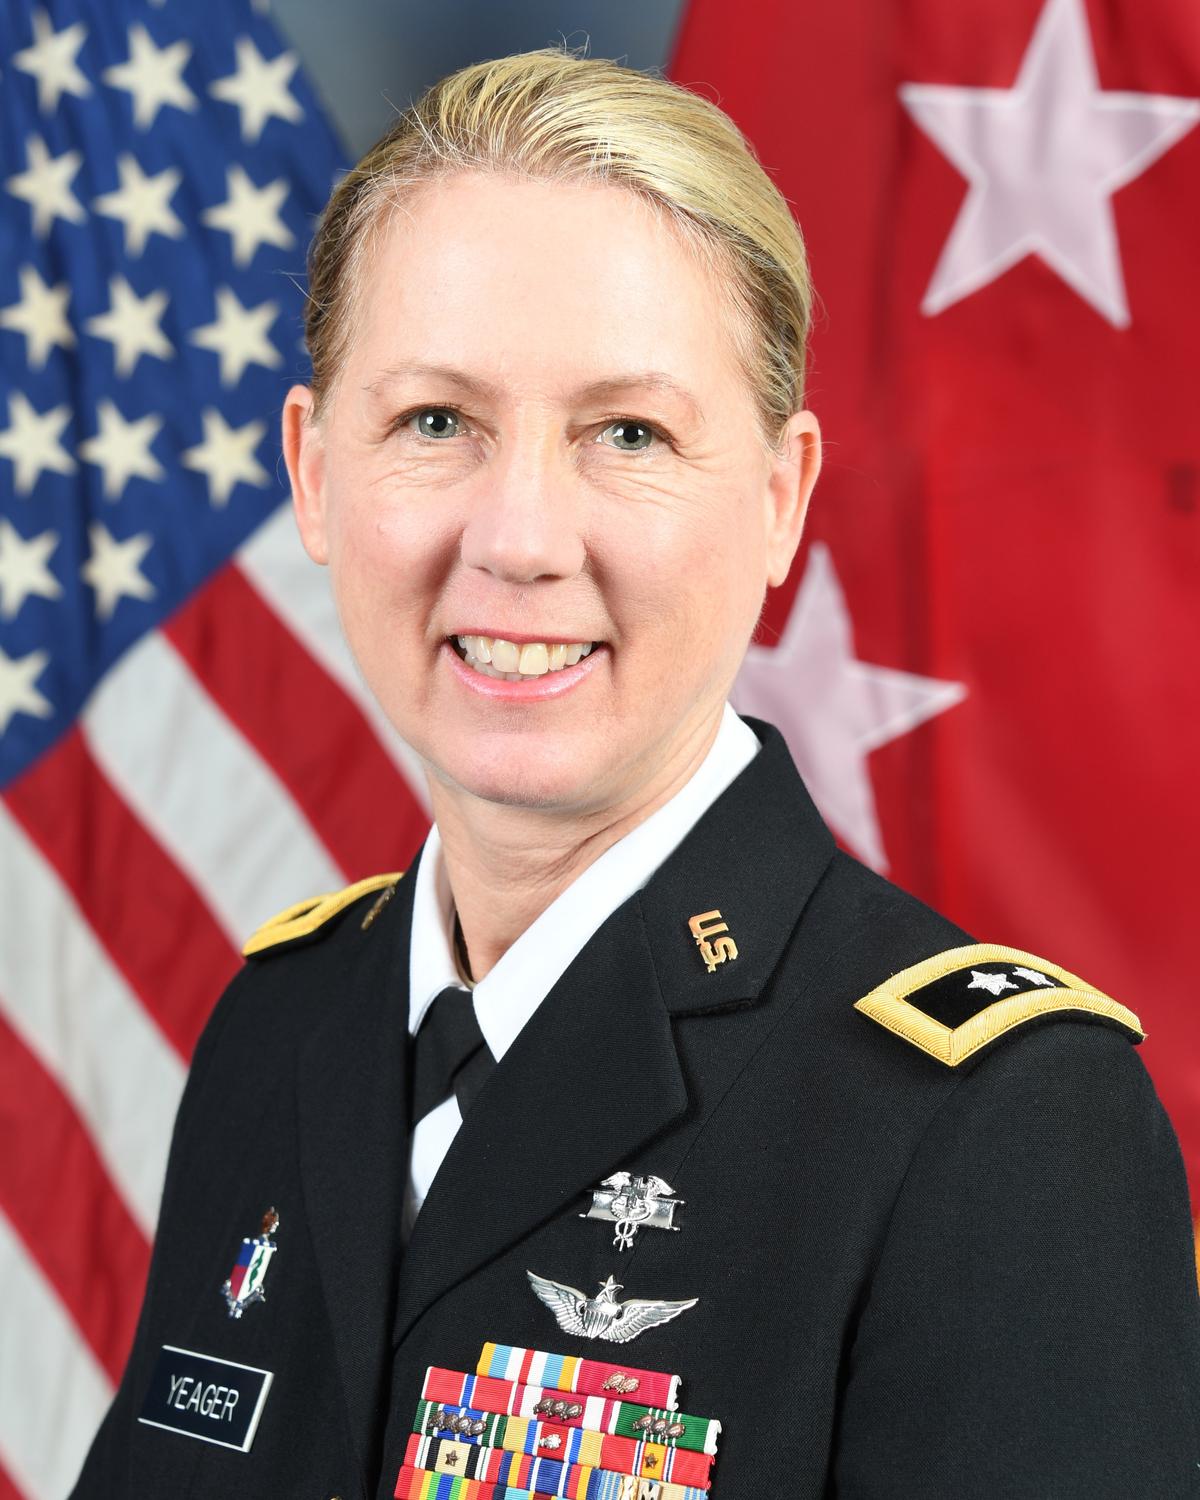 Brigadier General Laura Yeager (©Wikipedia | <a href="https://en.wikipedia.org/wiki/File:Laura_L._Yeager_(4).jpg">National Guard Bureau</a>)